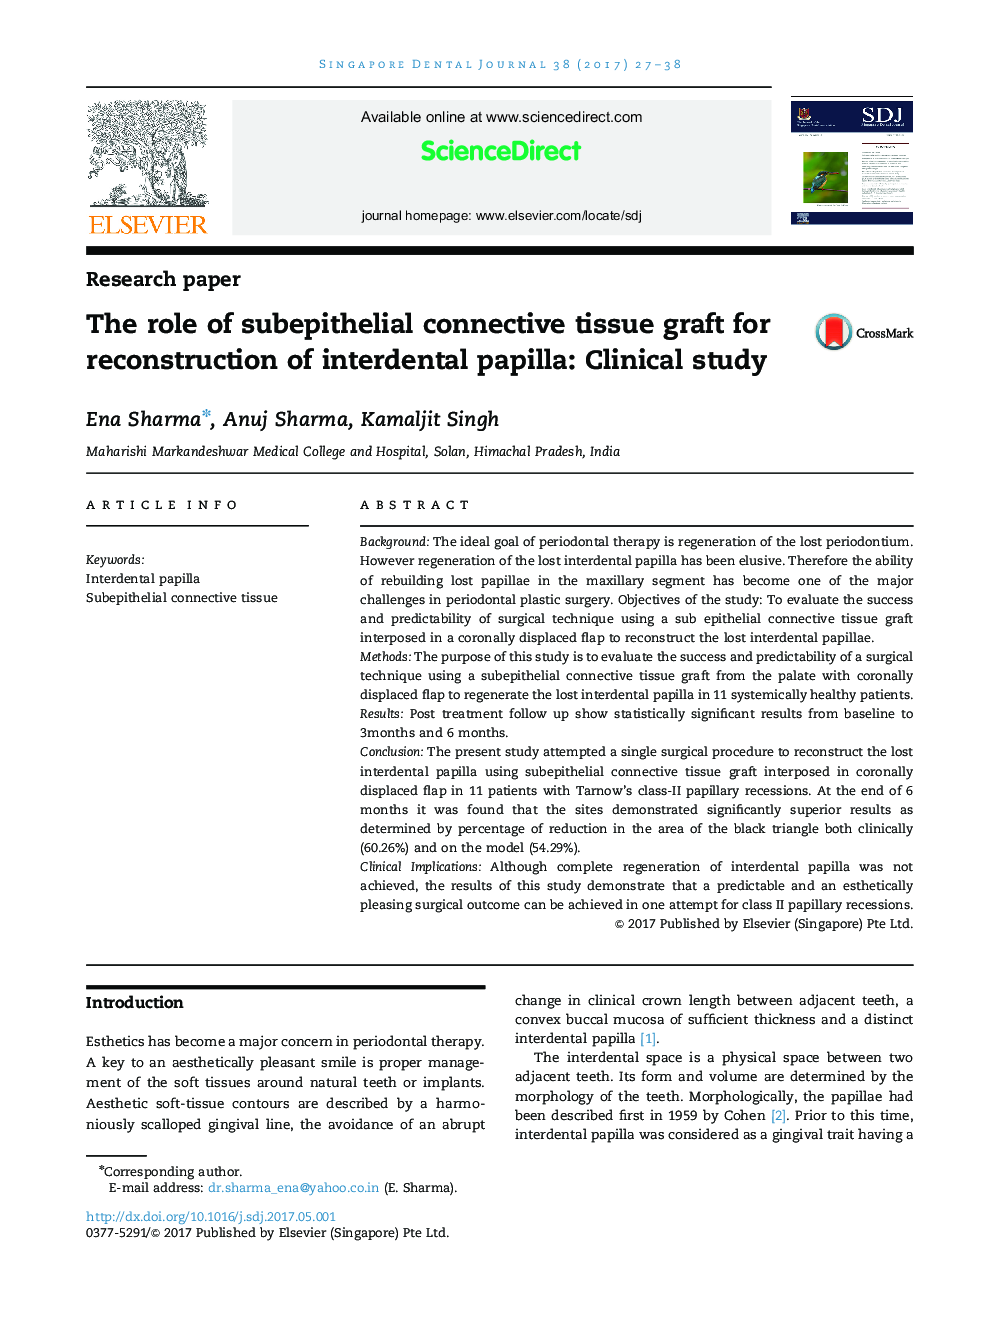 The role of subepithelial connective tissue graft for reconstruction of interdental papilla: Clinical study